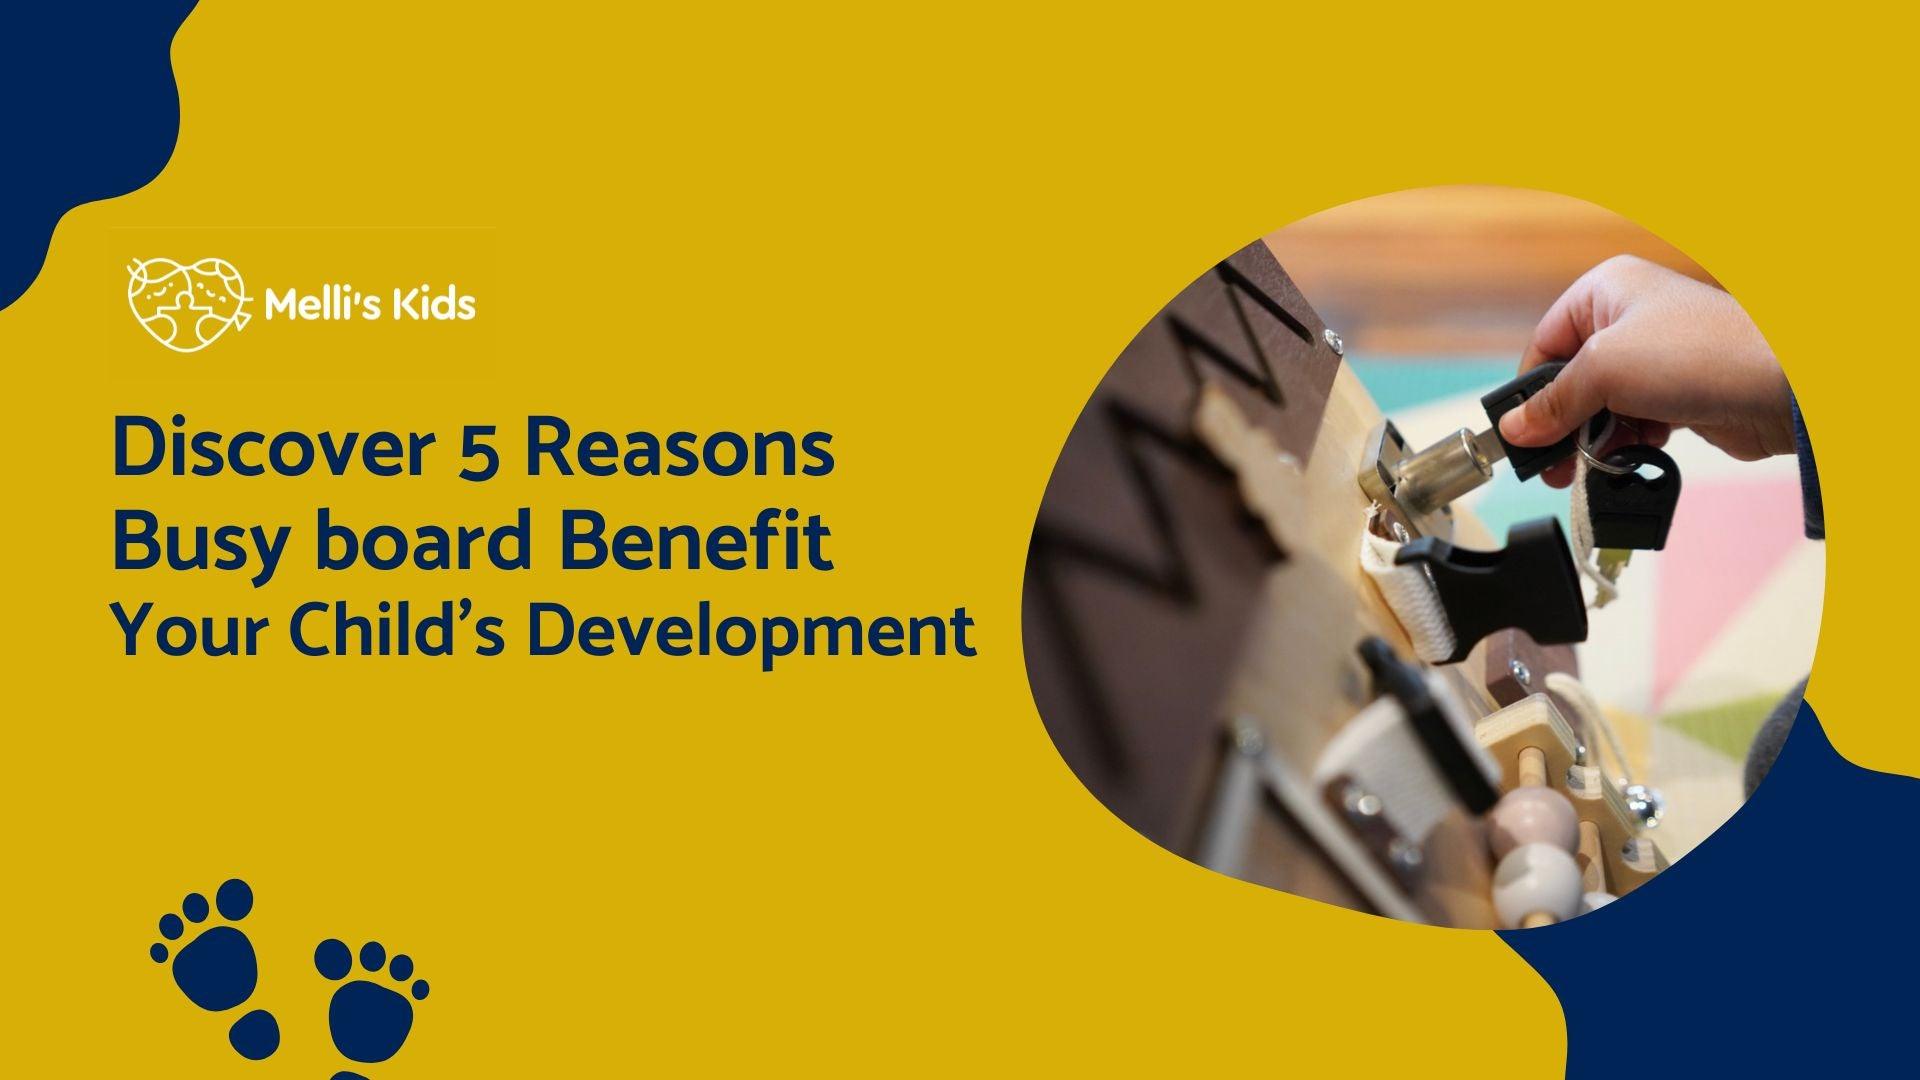 Discover 5 Reasons Busy board Benefit Your Child's Development - Melli's Kids